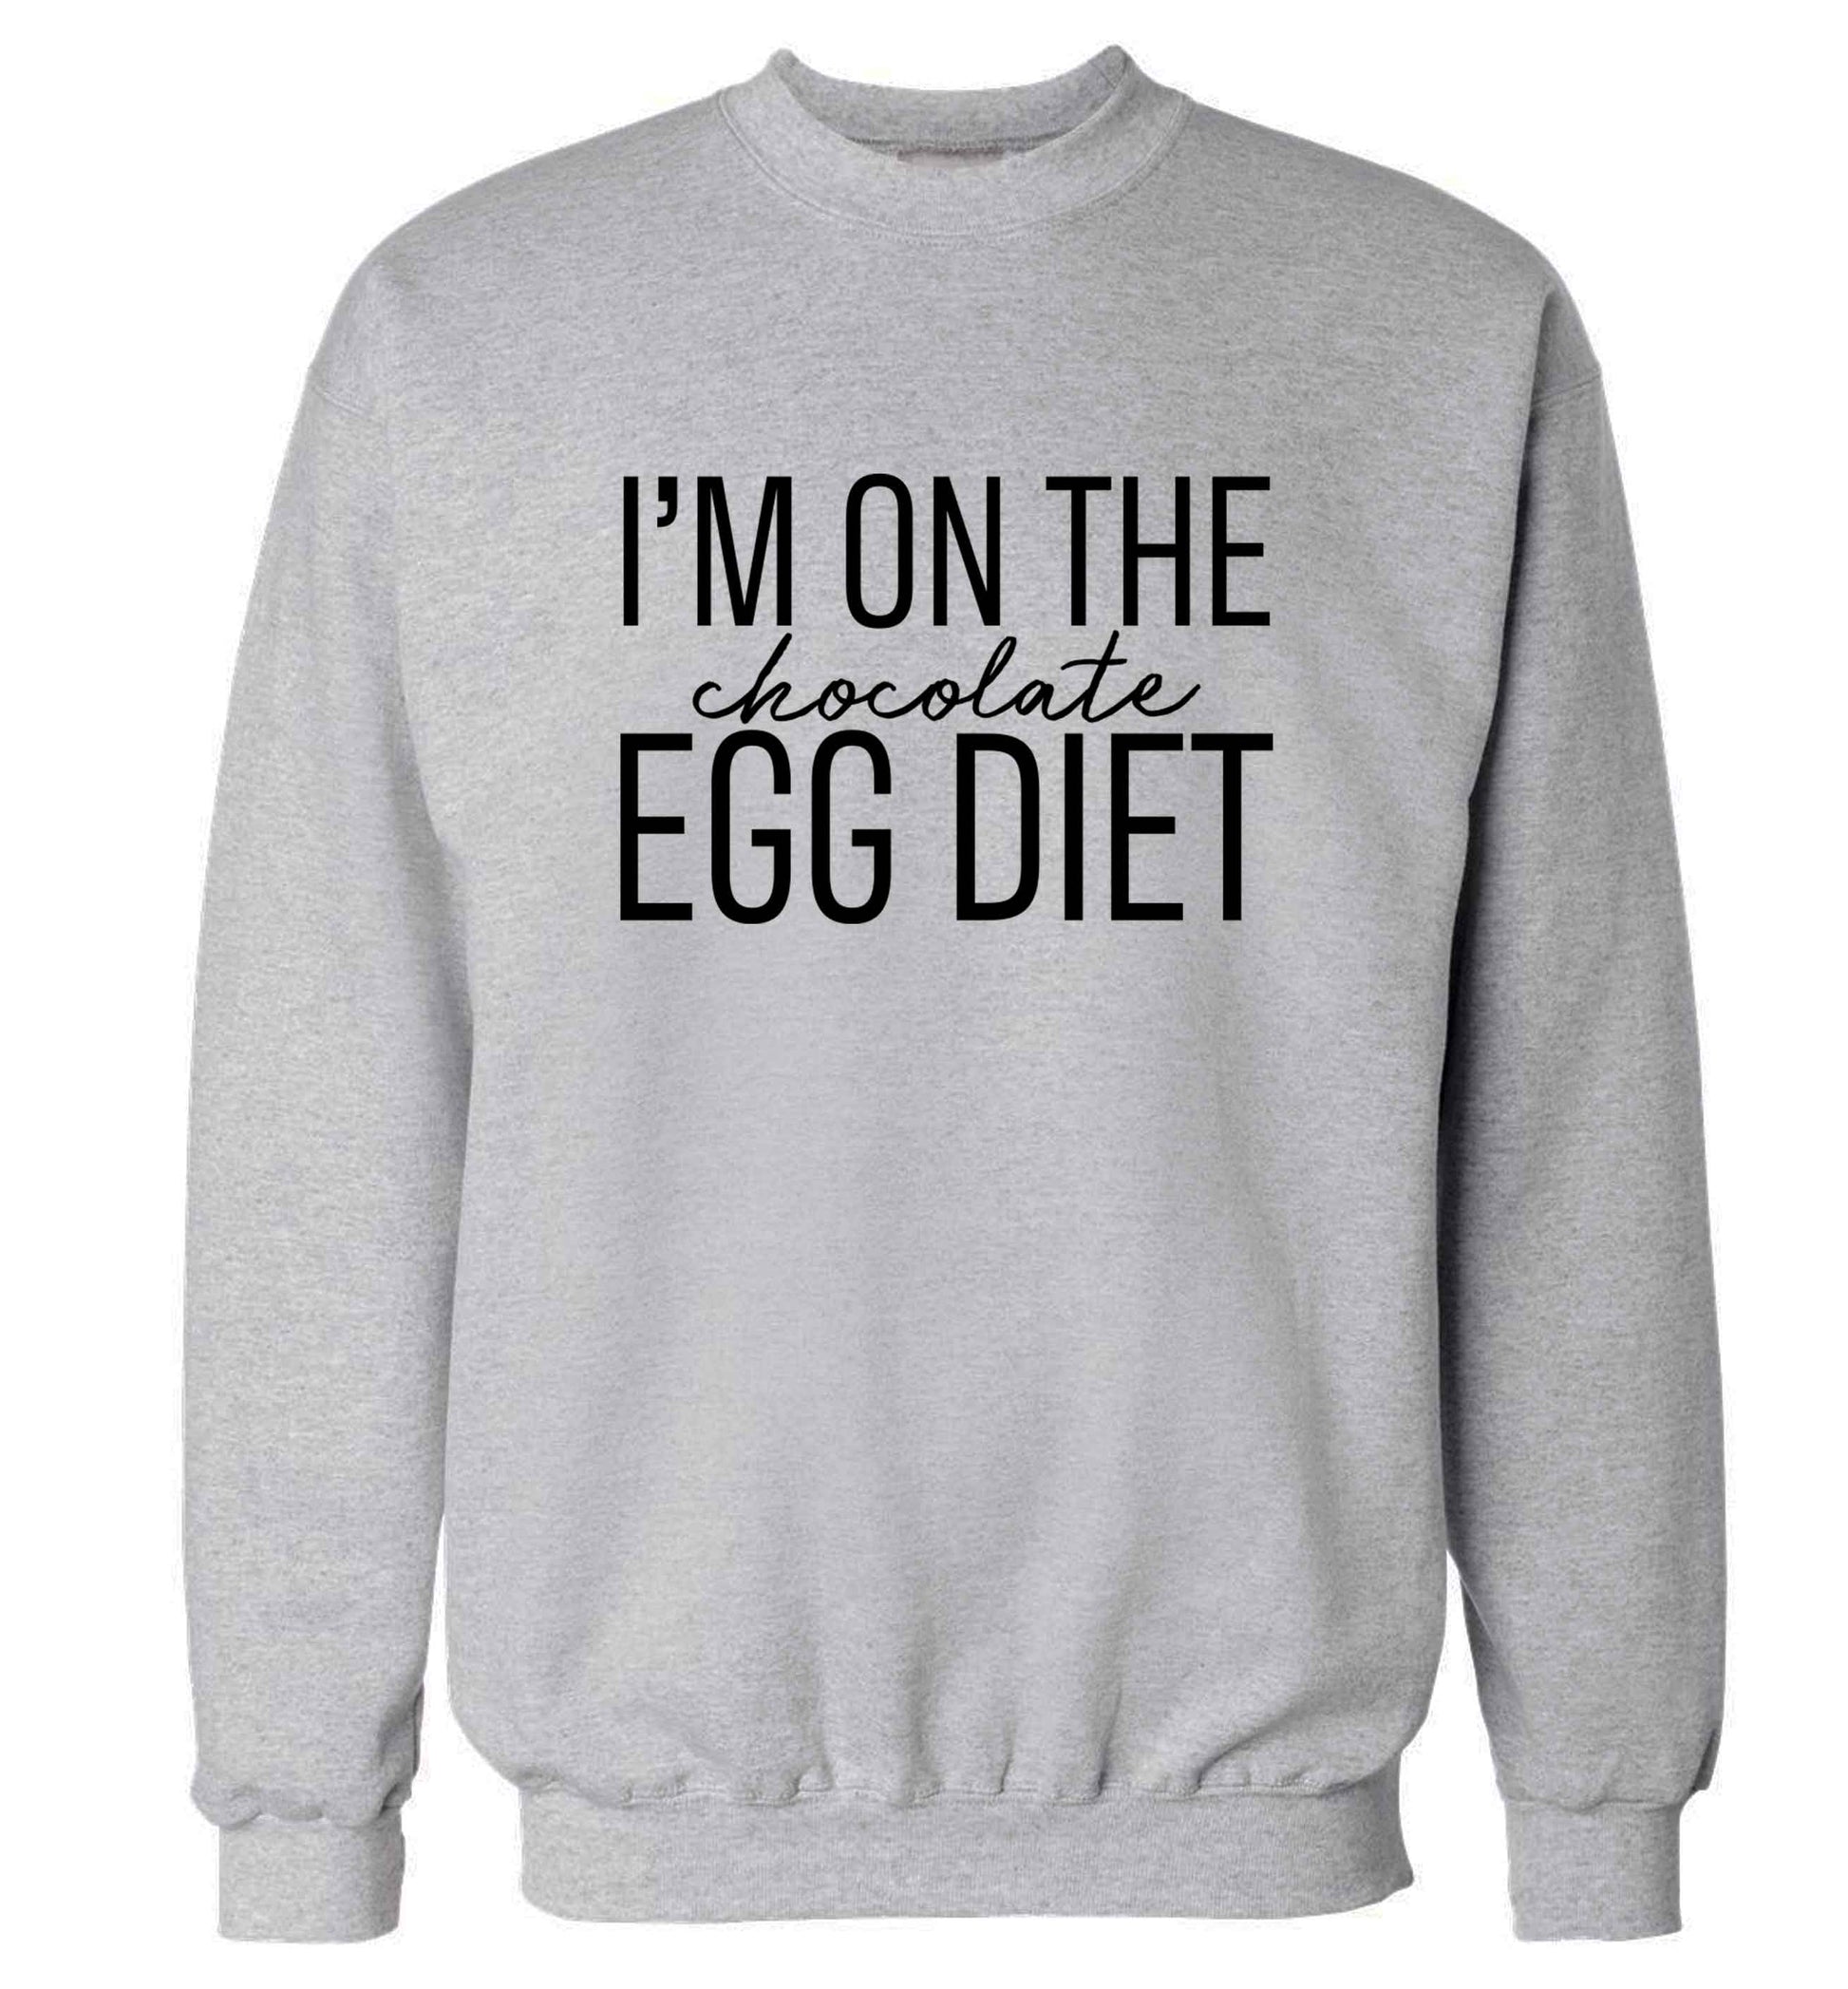 I'm on the chocolate egg diet adult's unisex grey sweater 2XL